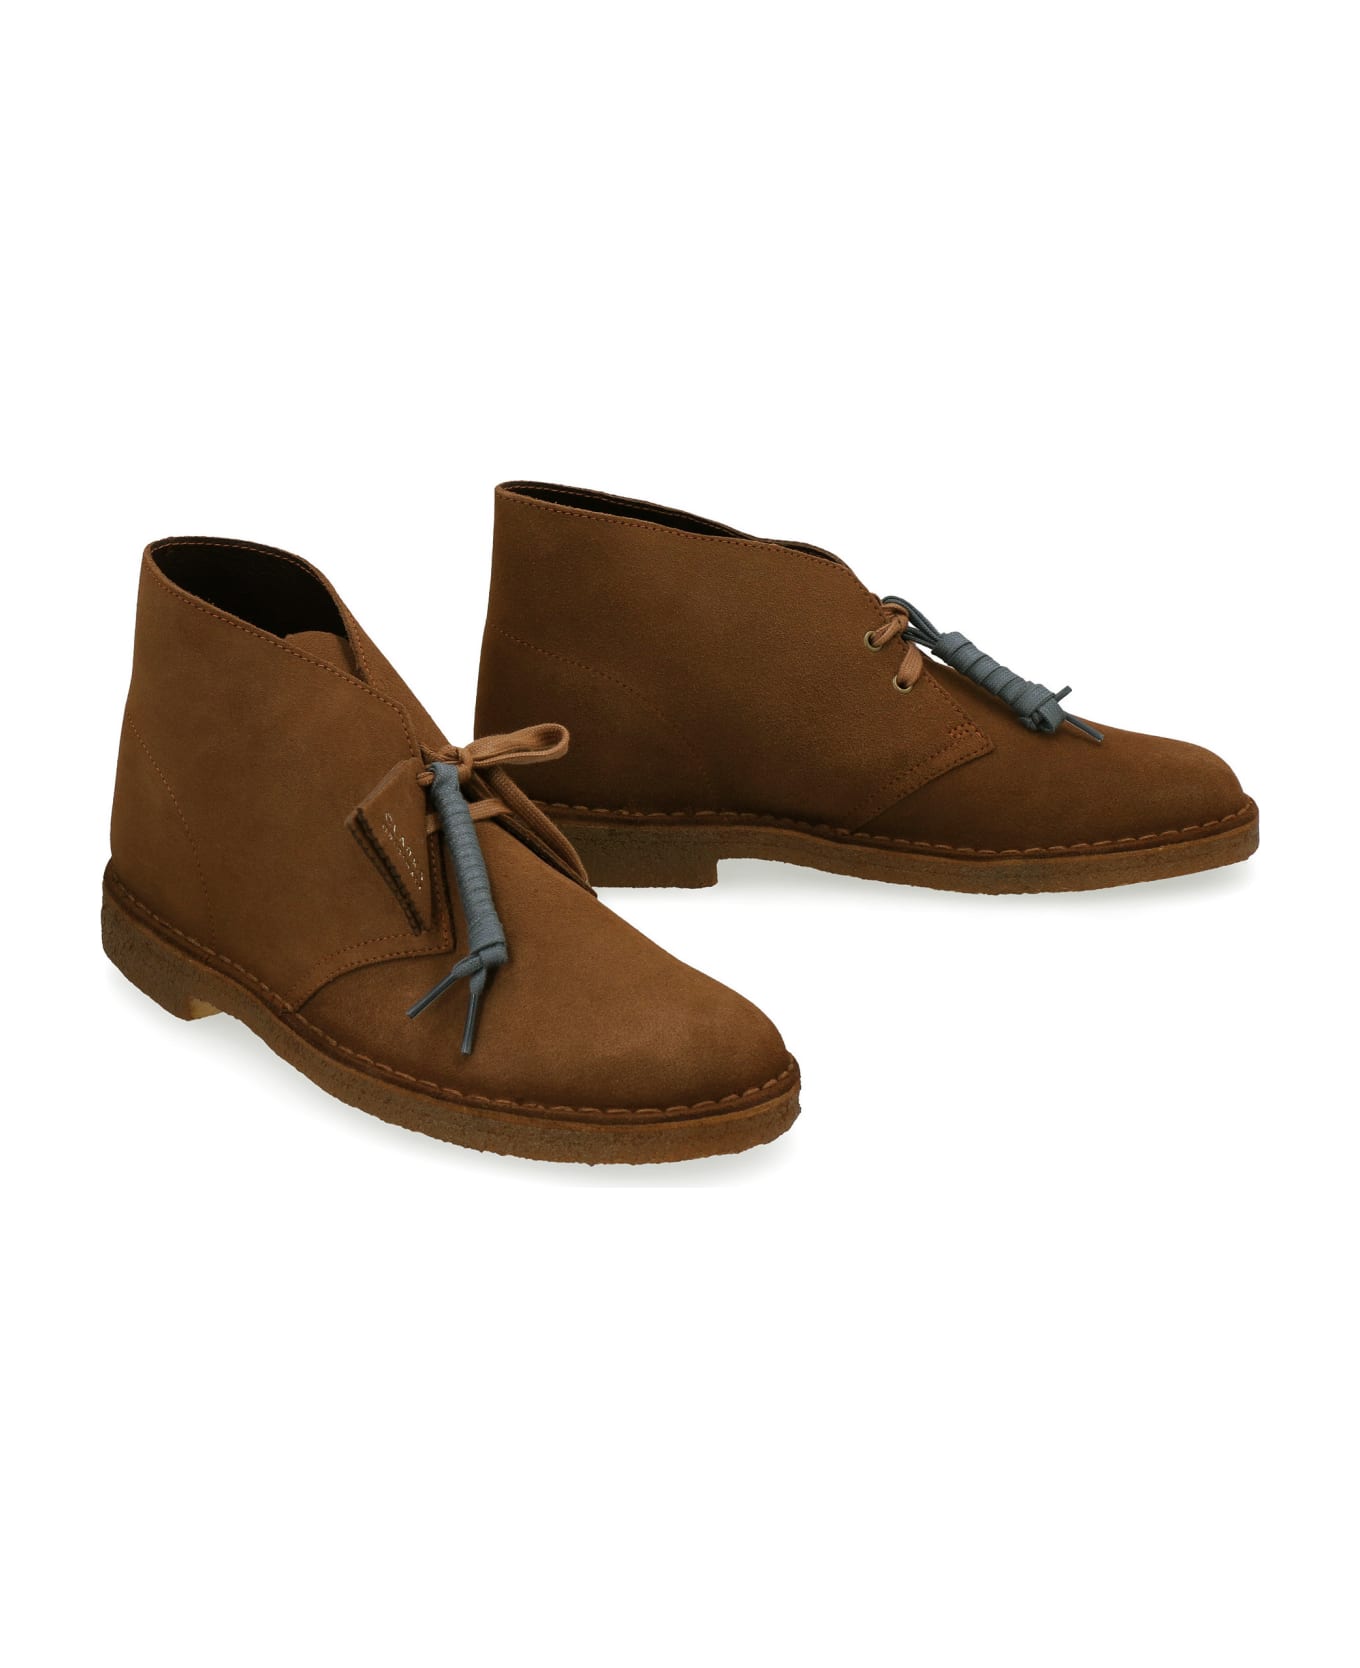 Clarks Suede Desert Boots - Saddle Brown